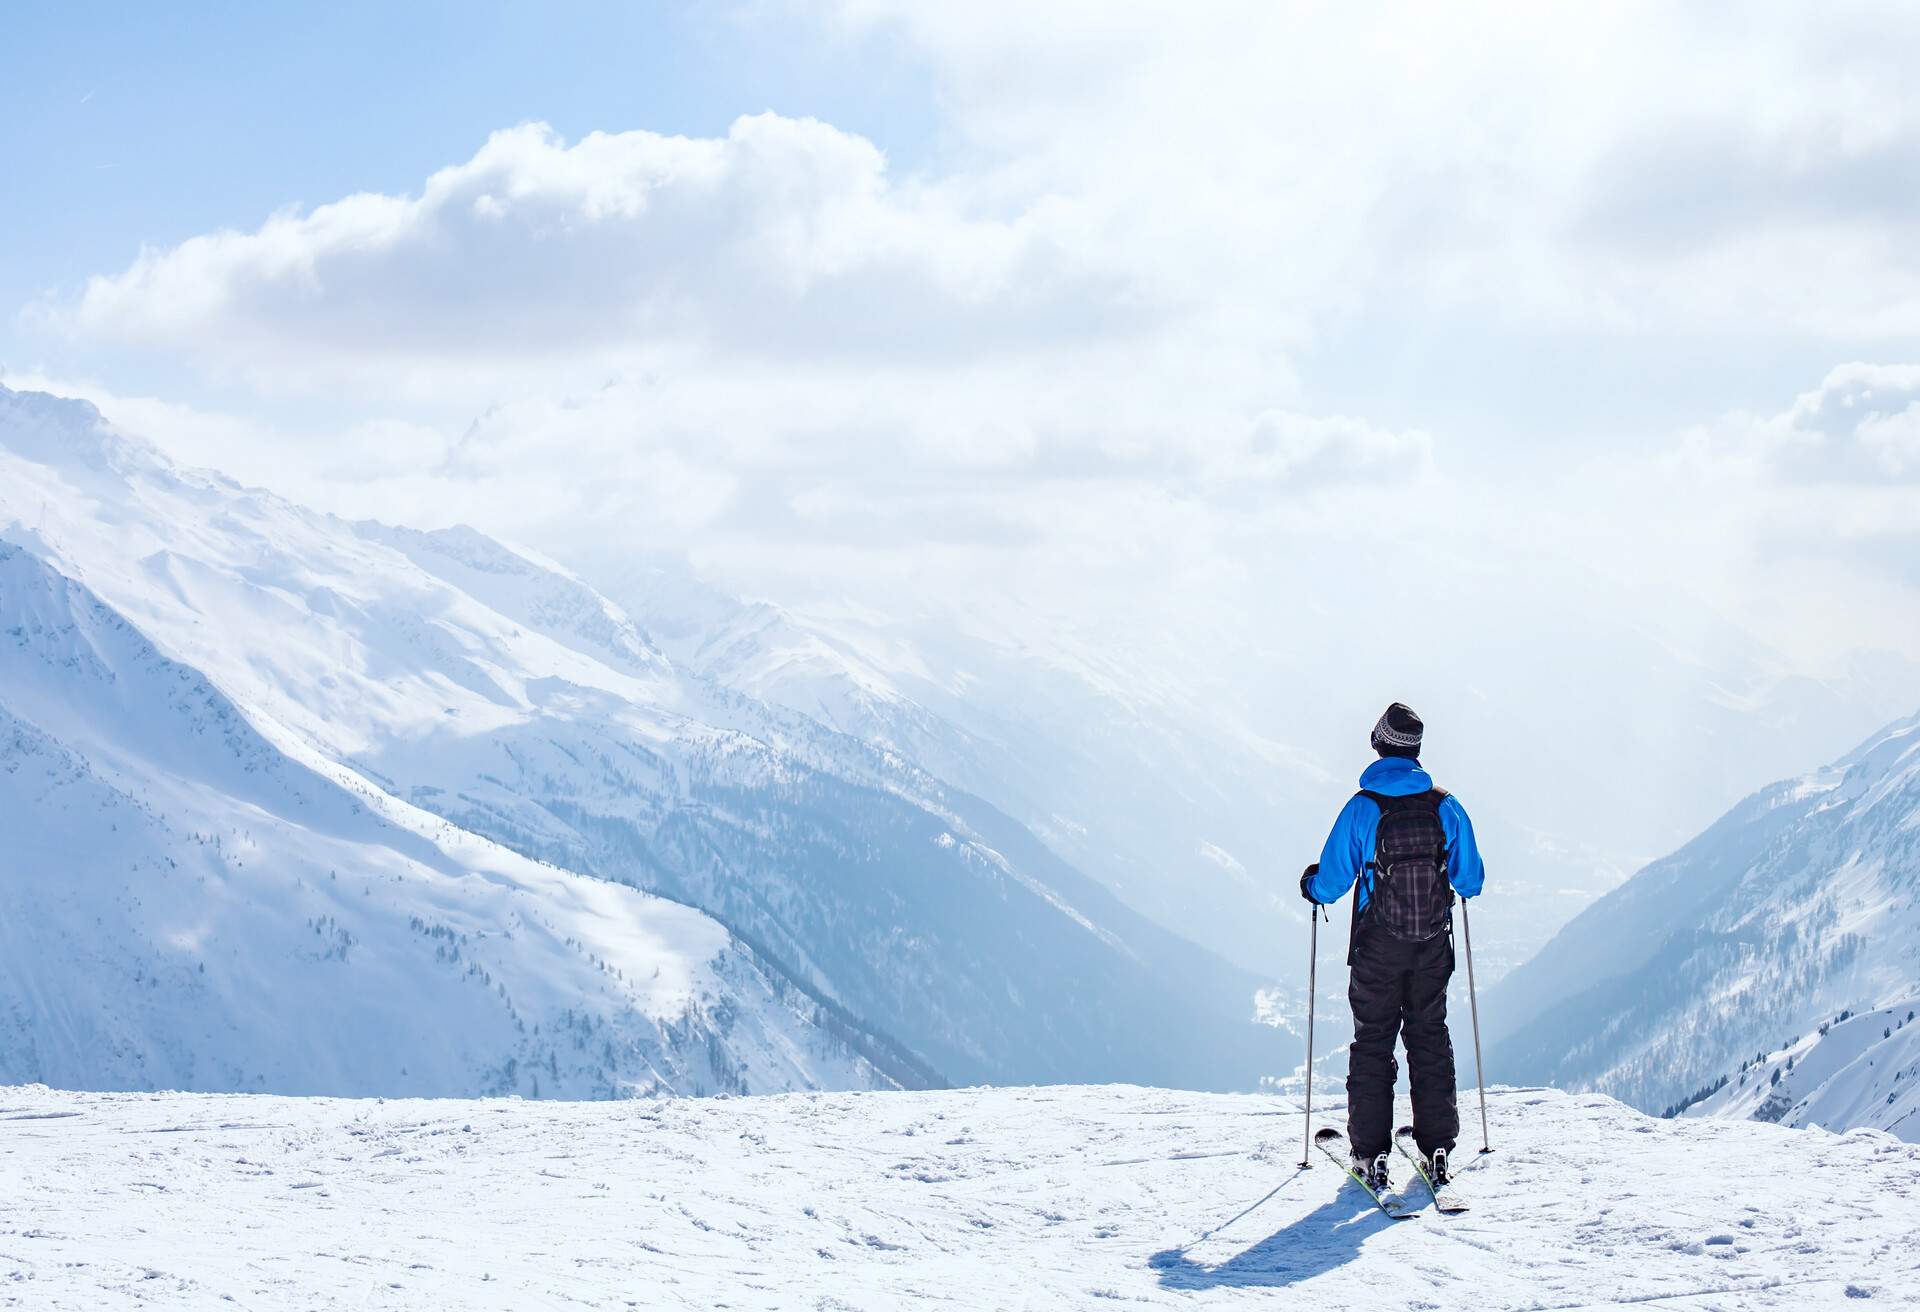 Skier with a pole standing on a cliff's edge and appreciating the snow-covered mountains.